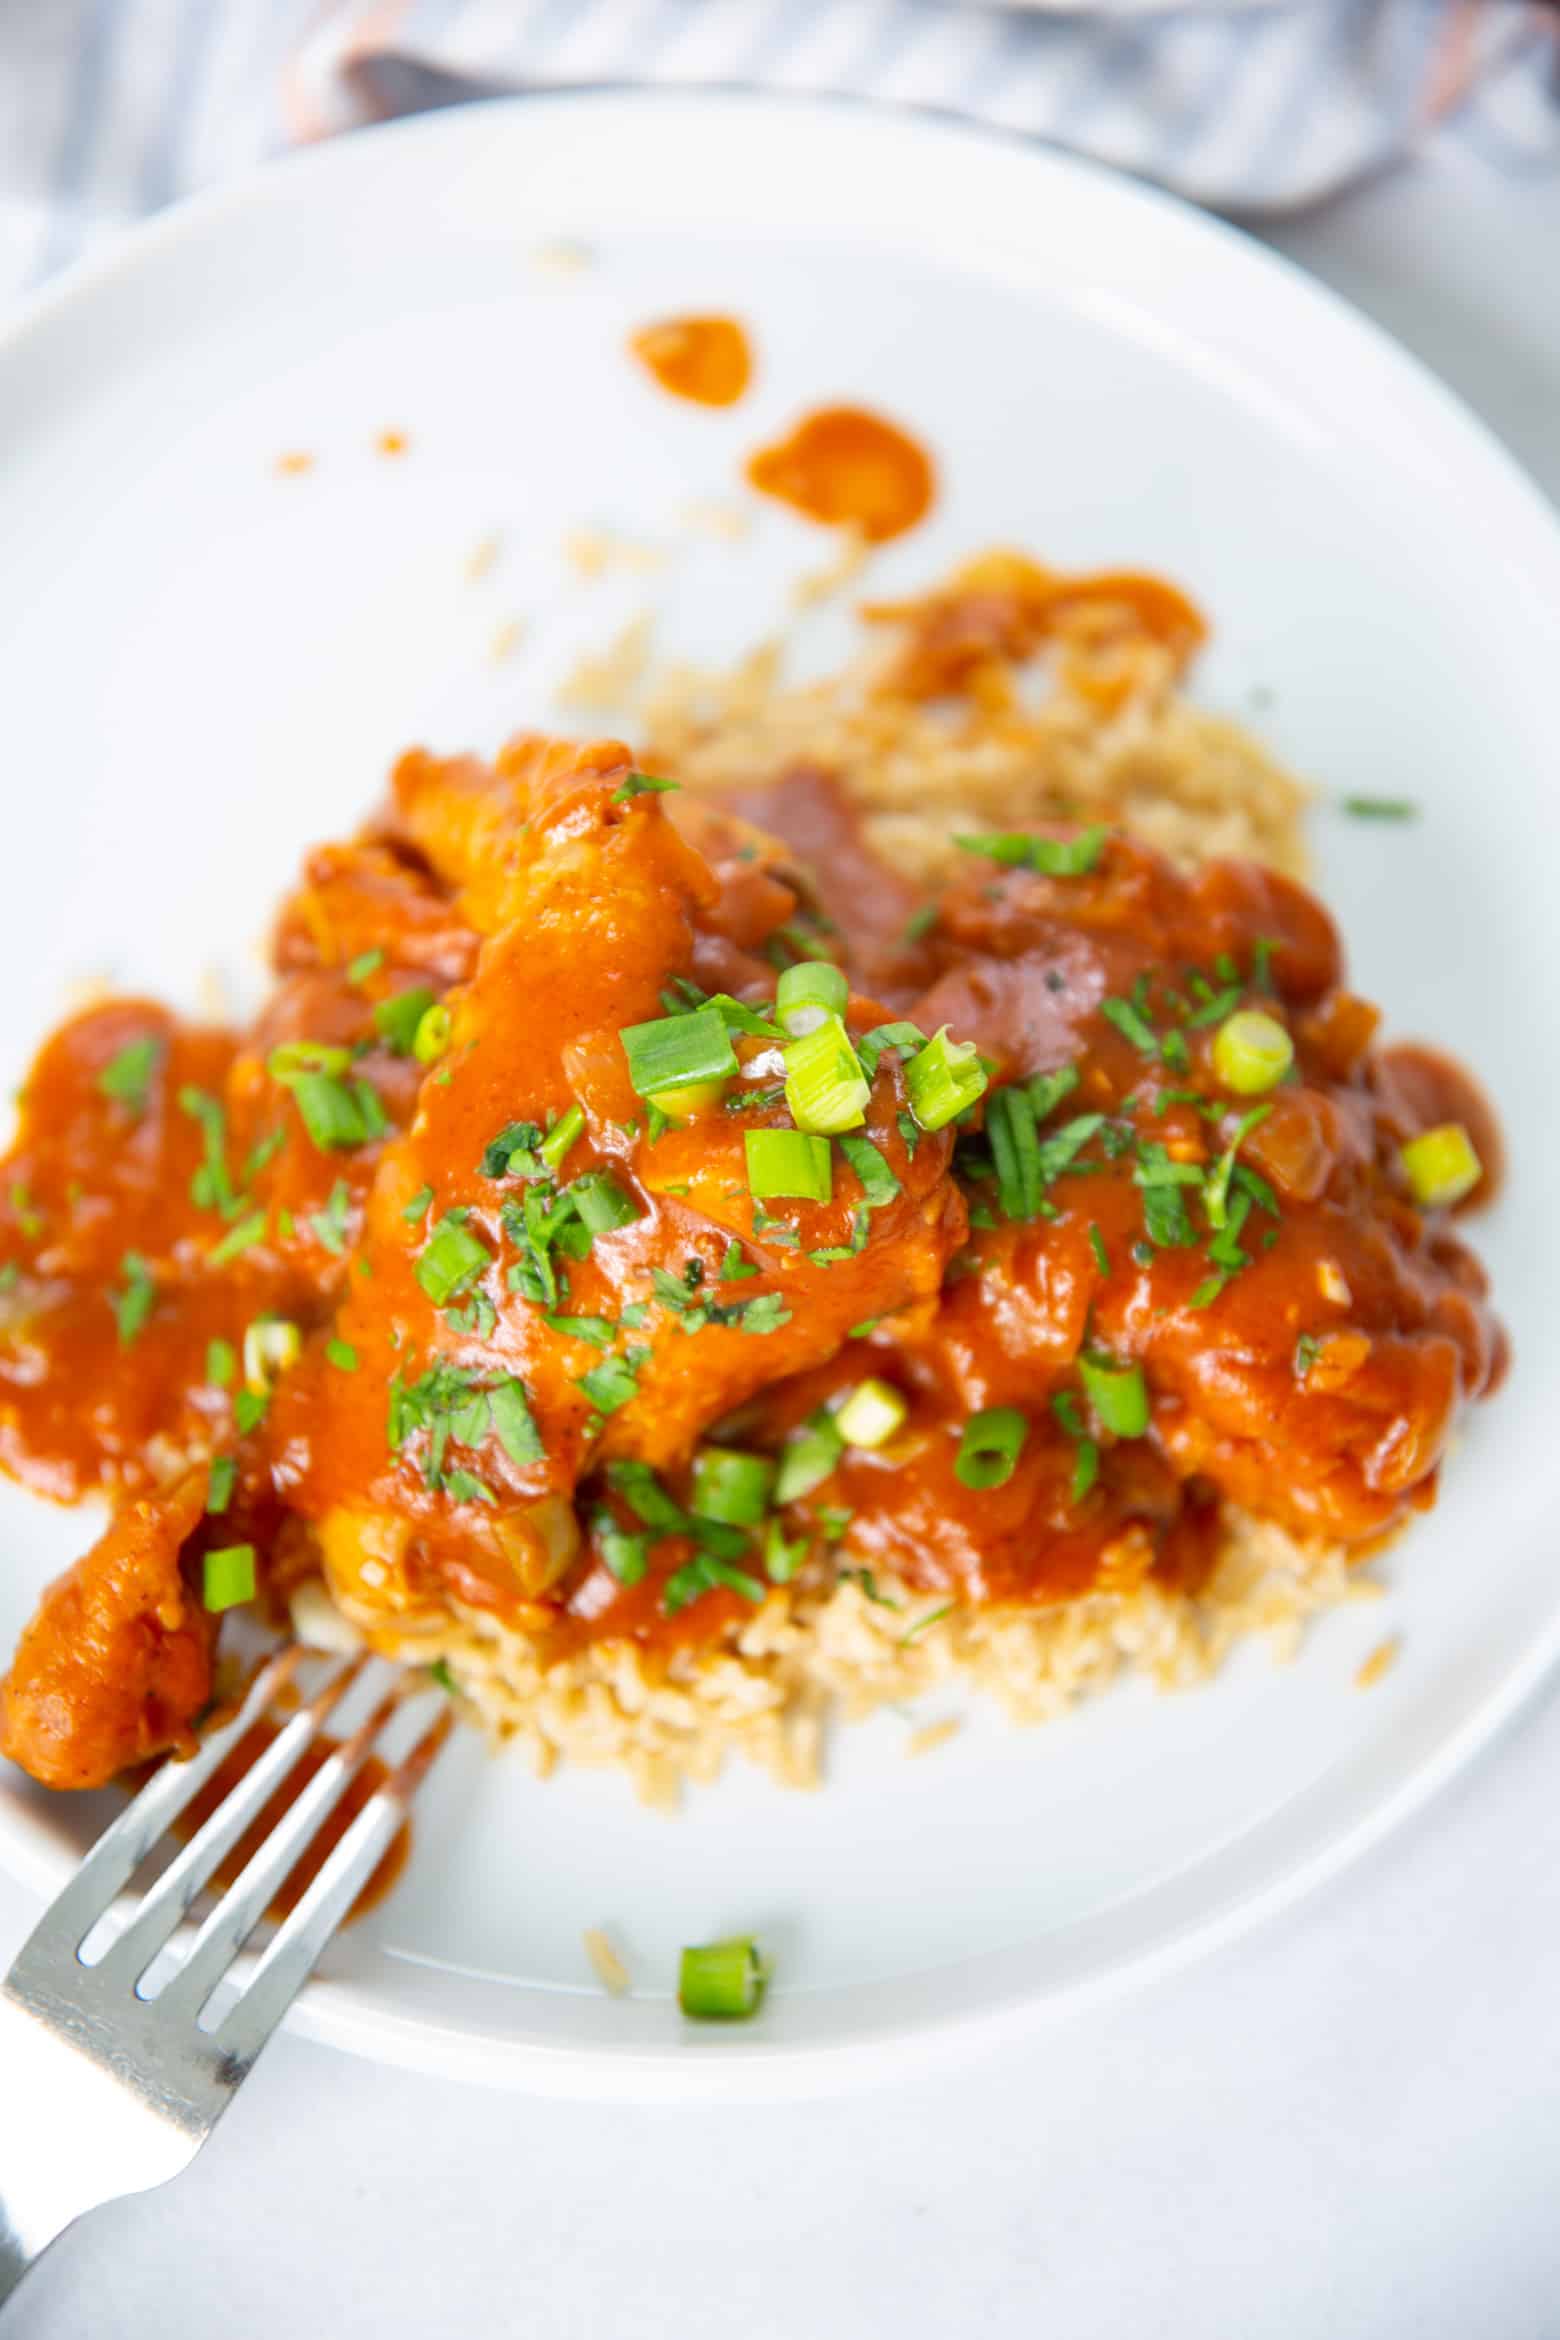 Chicken Sauce Piquant - Spicy Southern Kitchen